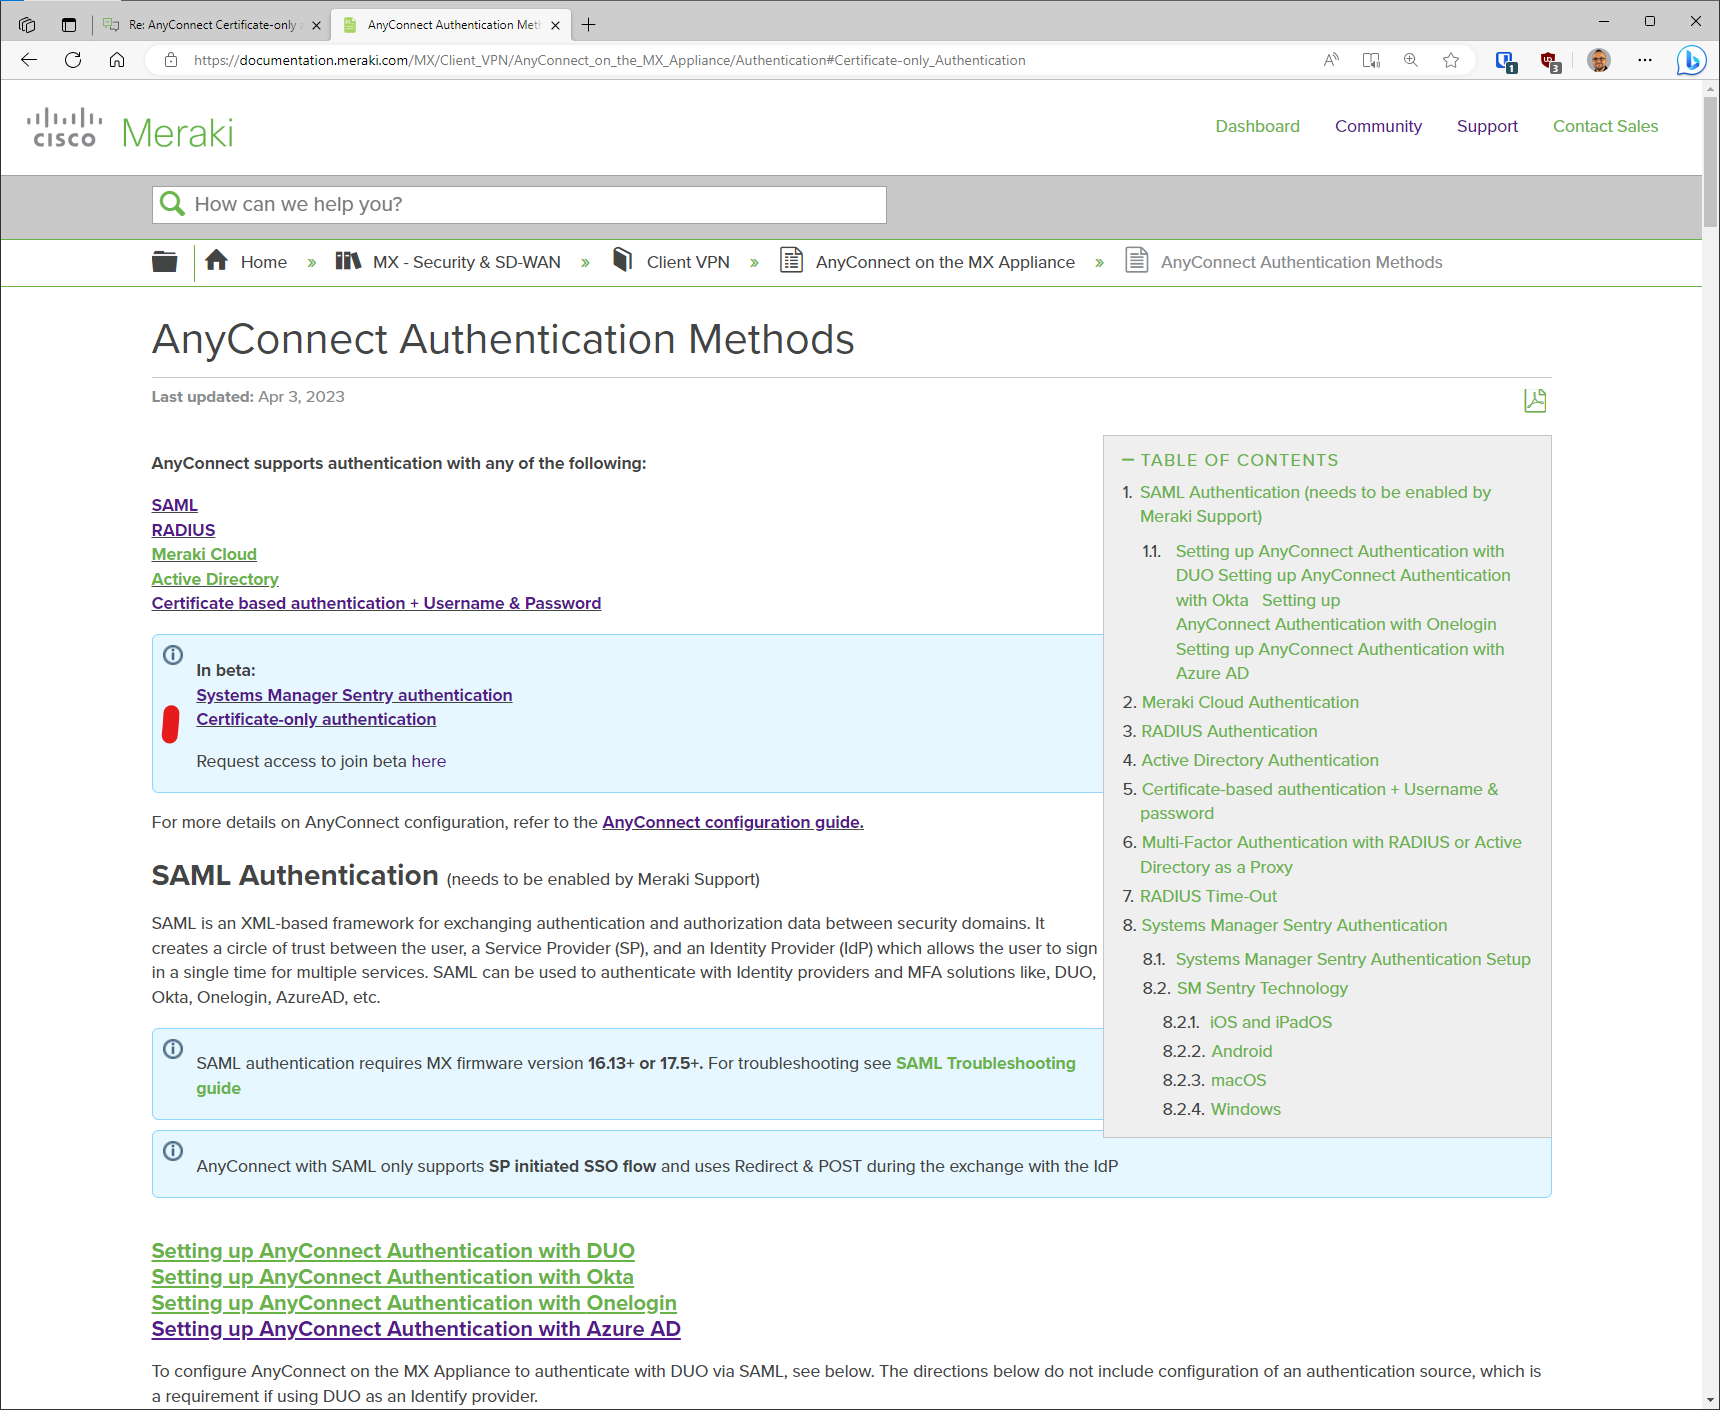 AnyConnect Certificate only authentication beta experiences The